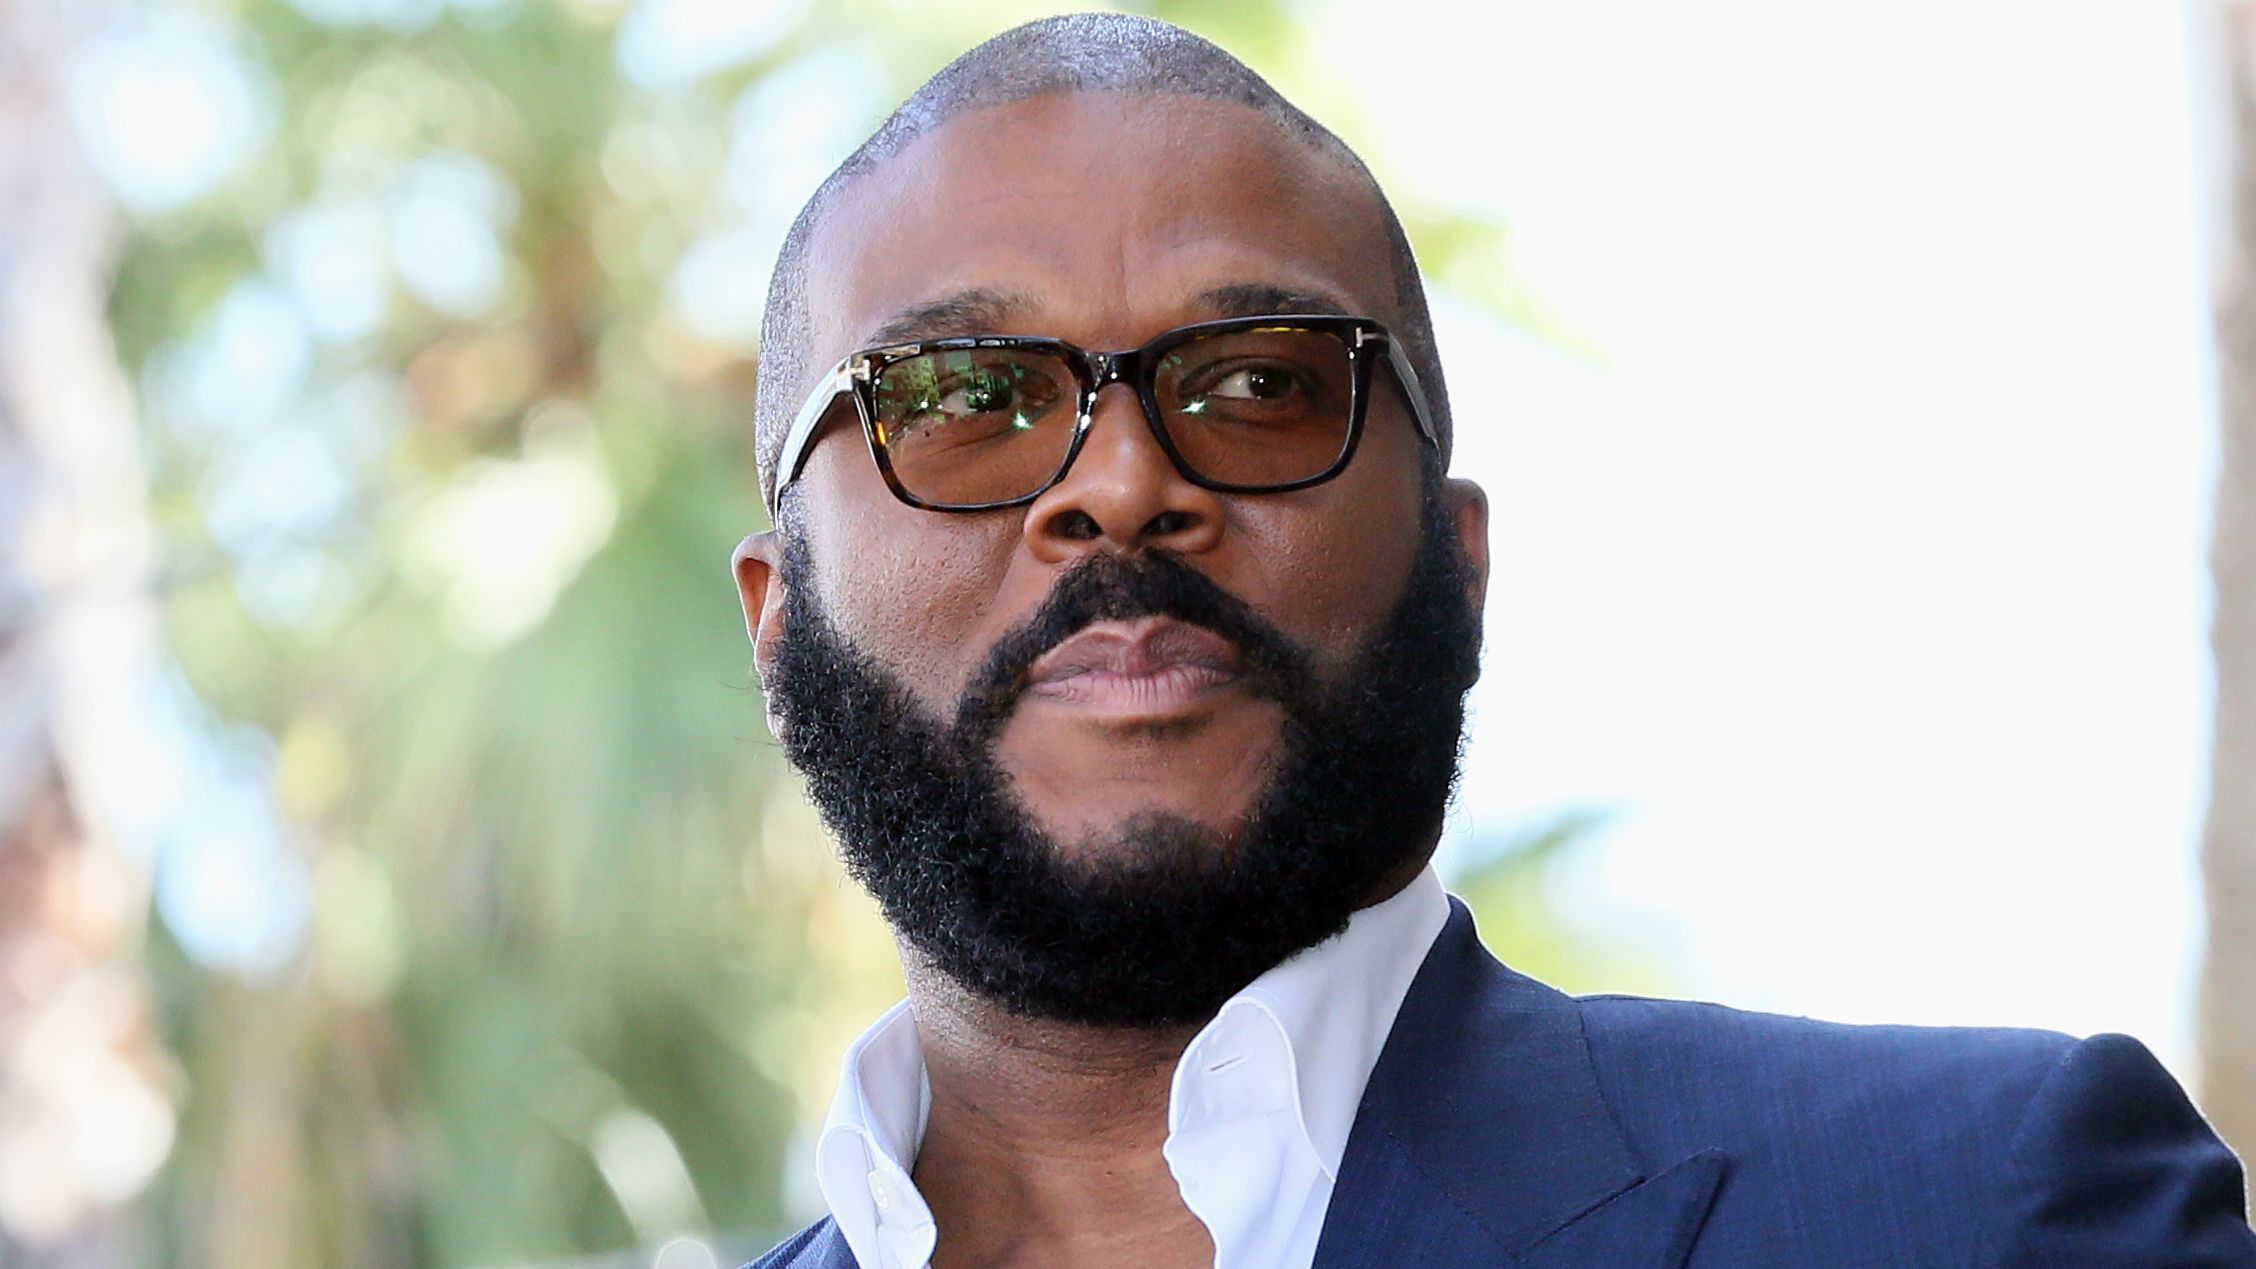 Tyler Perry offered his house in Southern California, where Prince Harry and Meghan Markle stayed for several months.